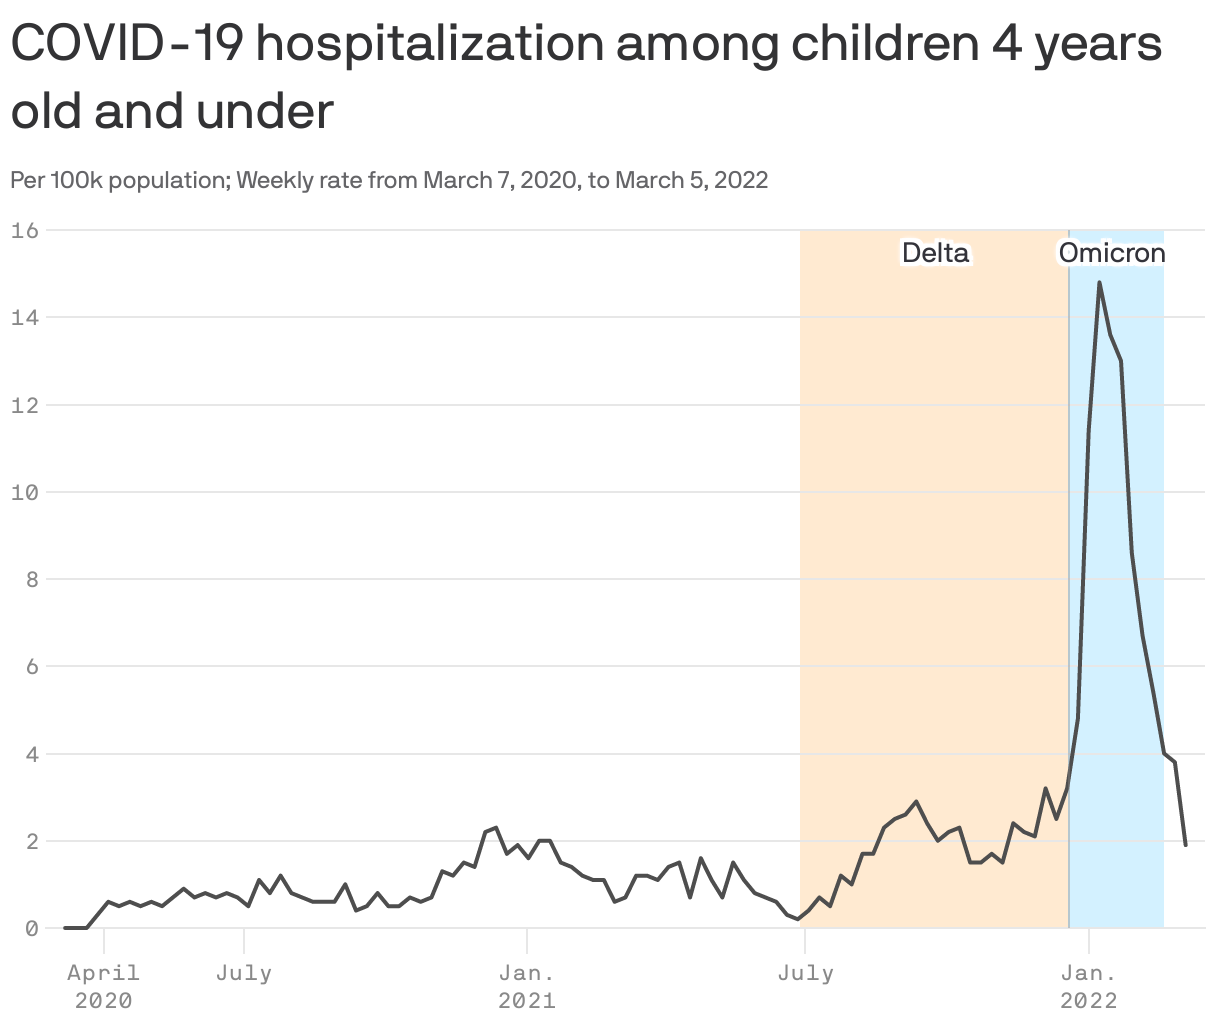 COVID-19 hospitalization among children 4 years old and under